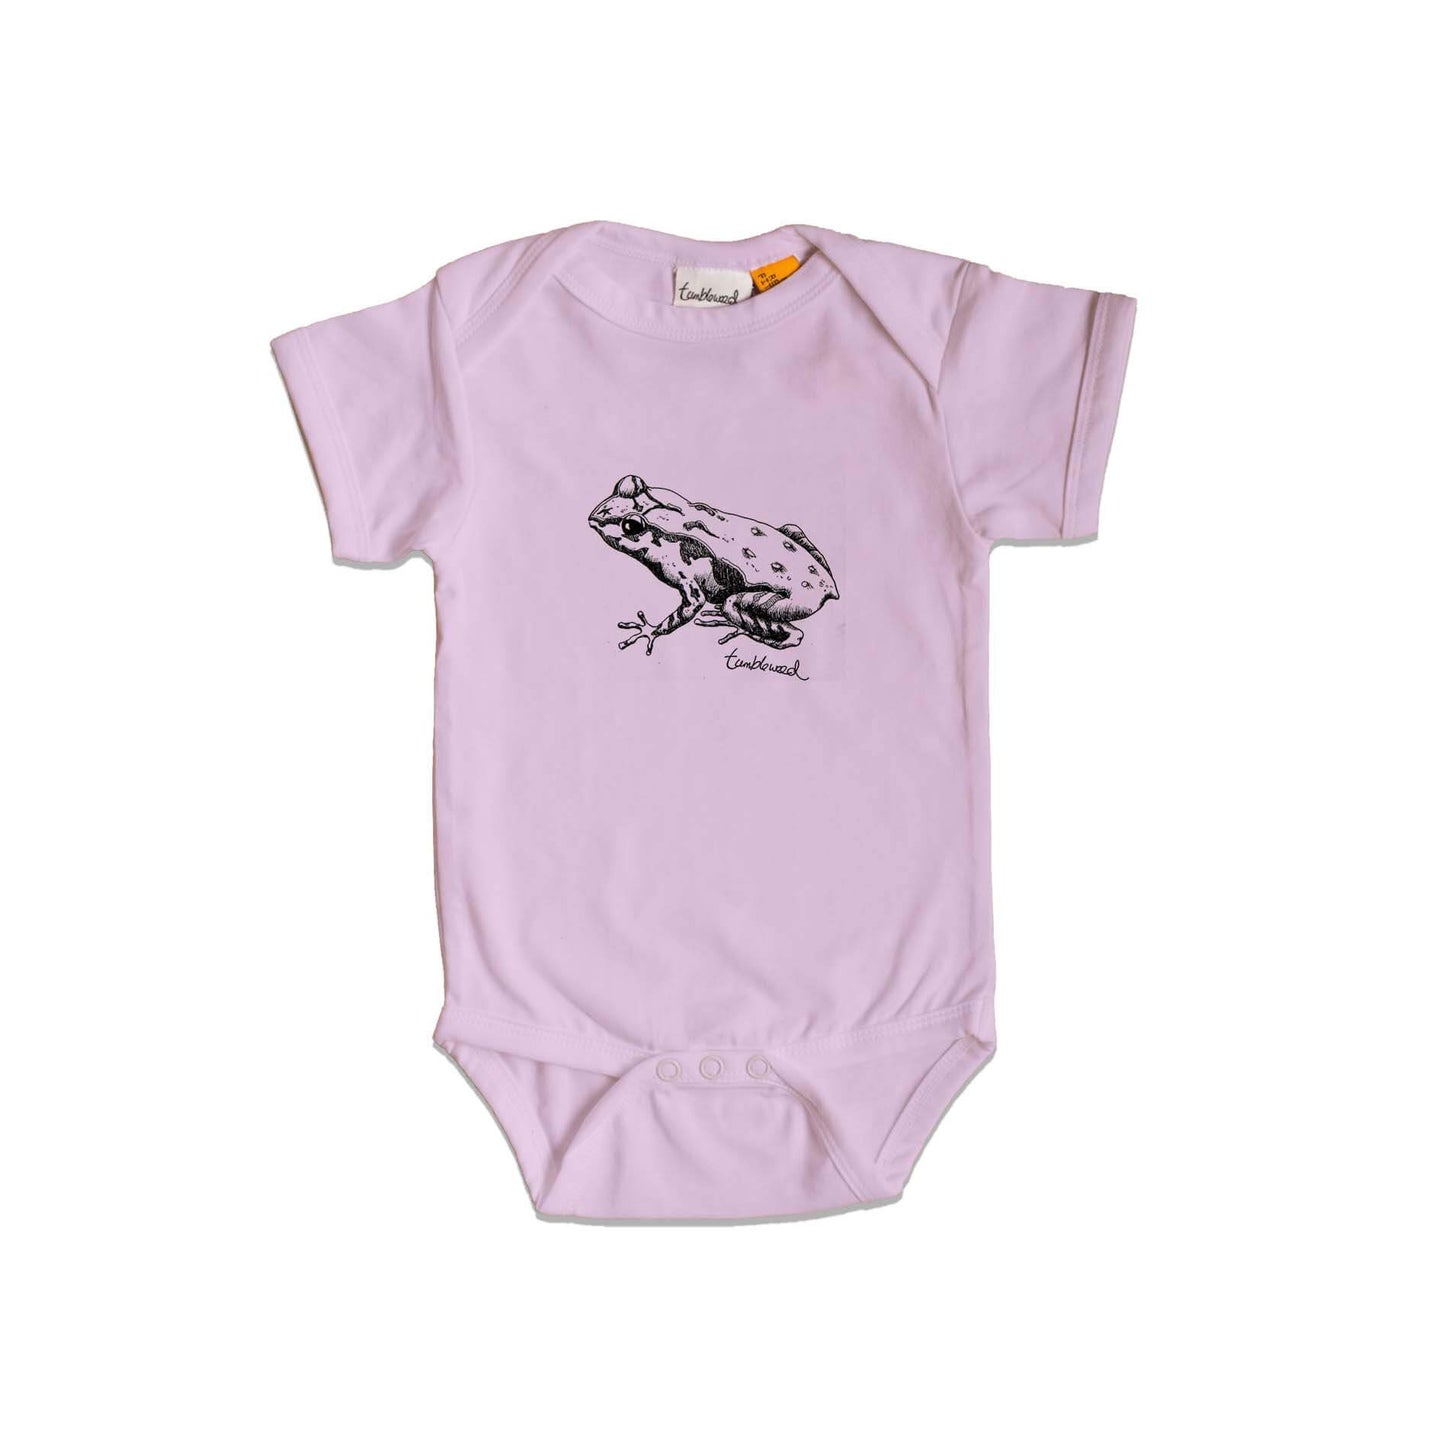 Short sleeved, purple, organic cotton, baby onesie featuring a screen printed Archey's Frog design.
 design.